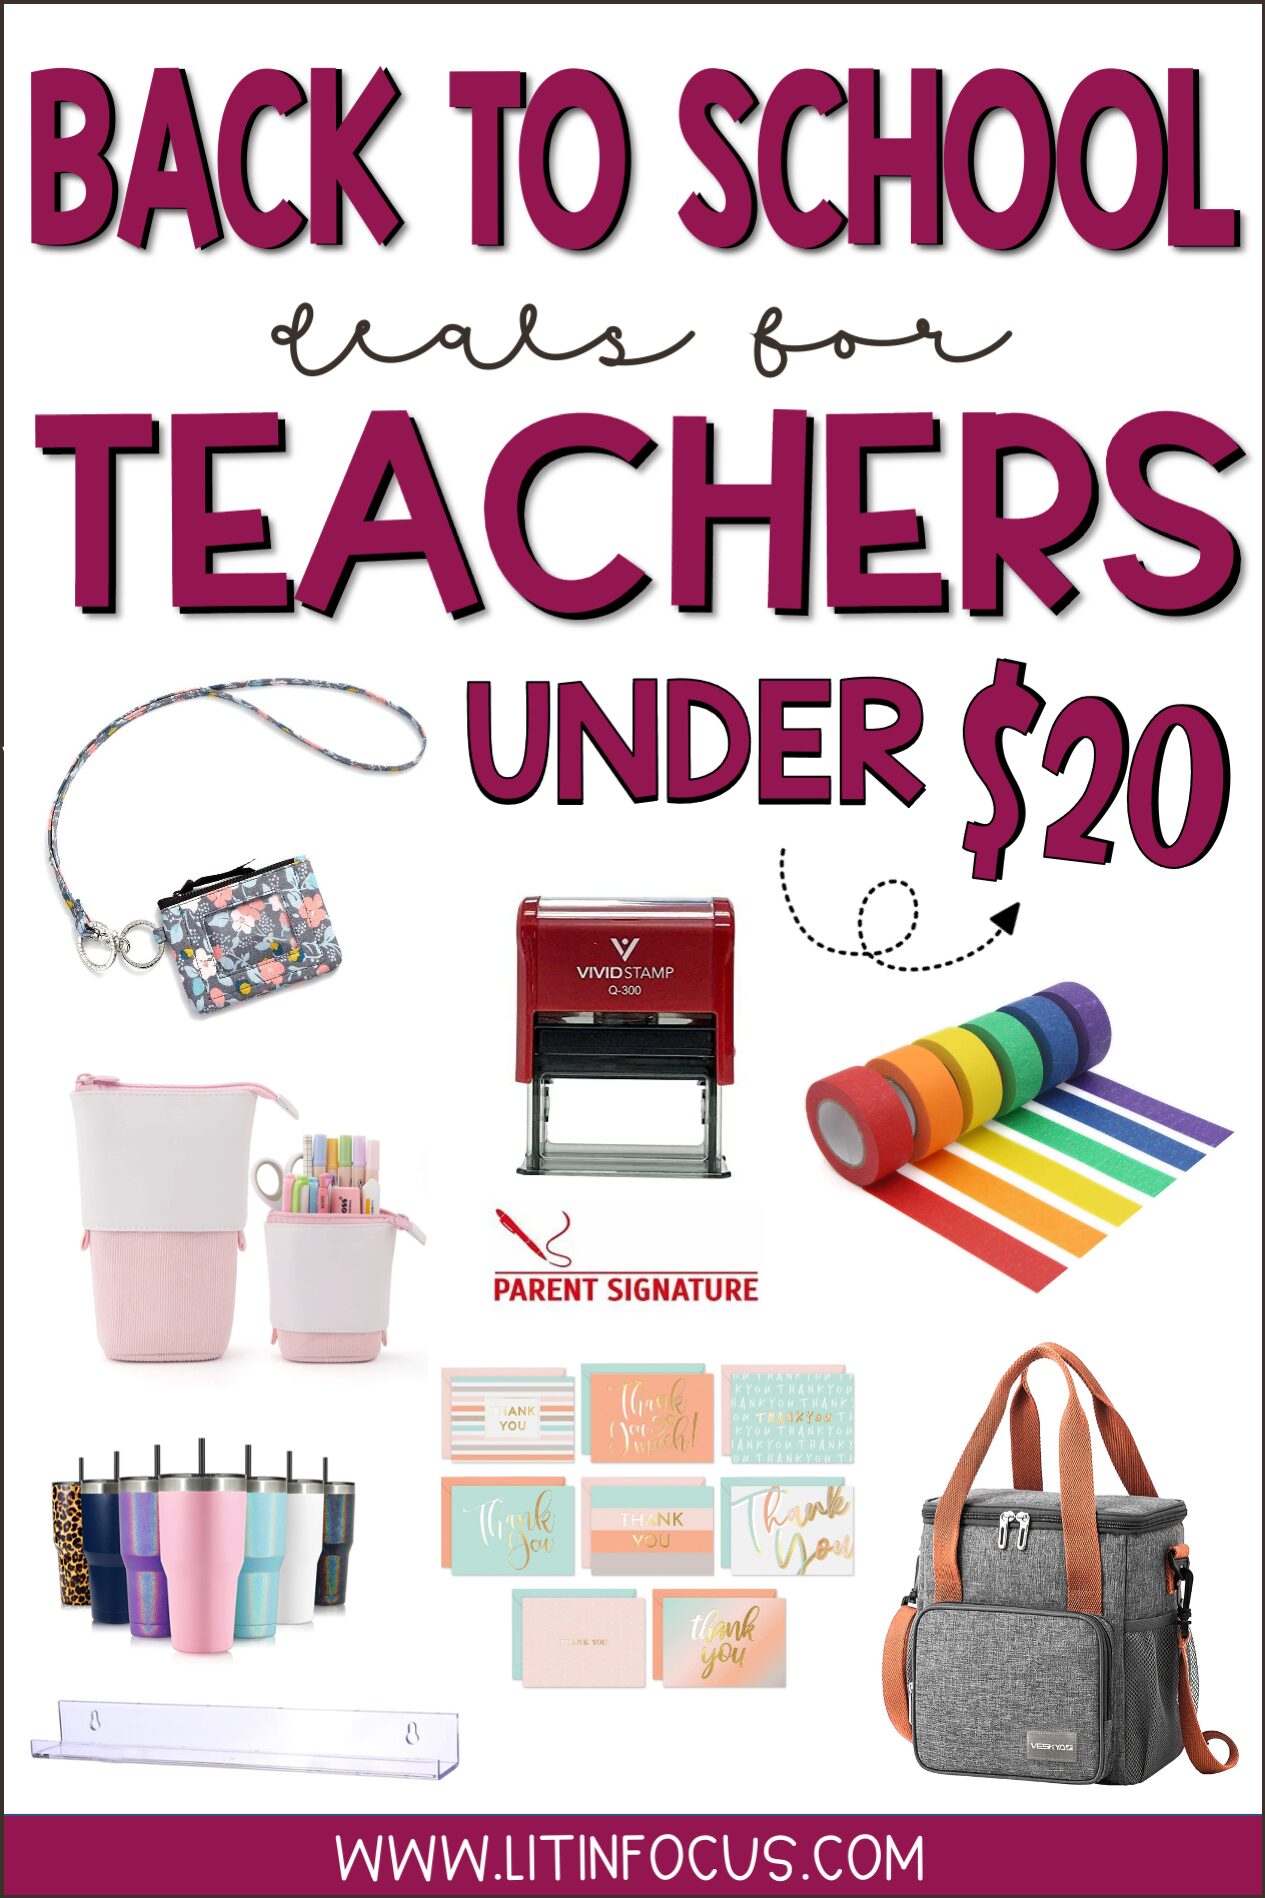 Back to School Teacher Supplies For Under $20 on Amazon